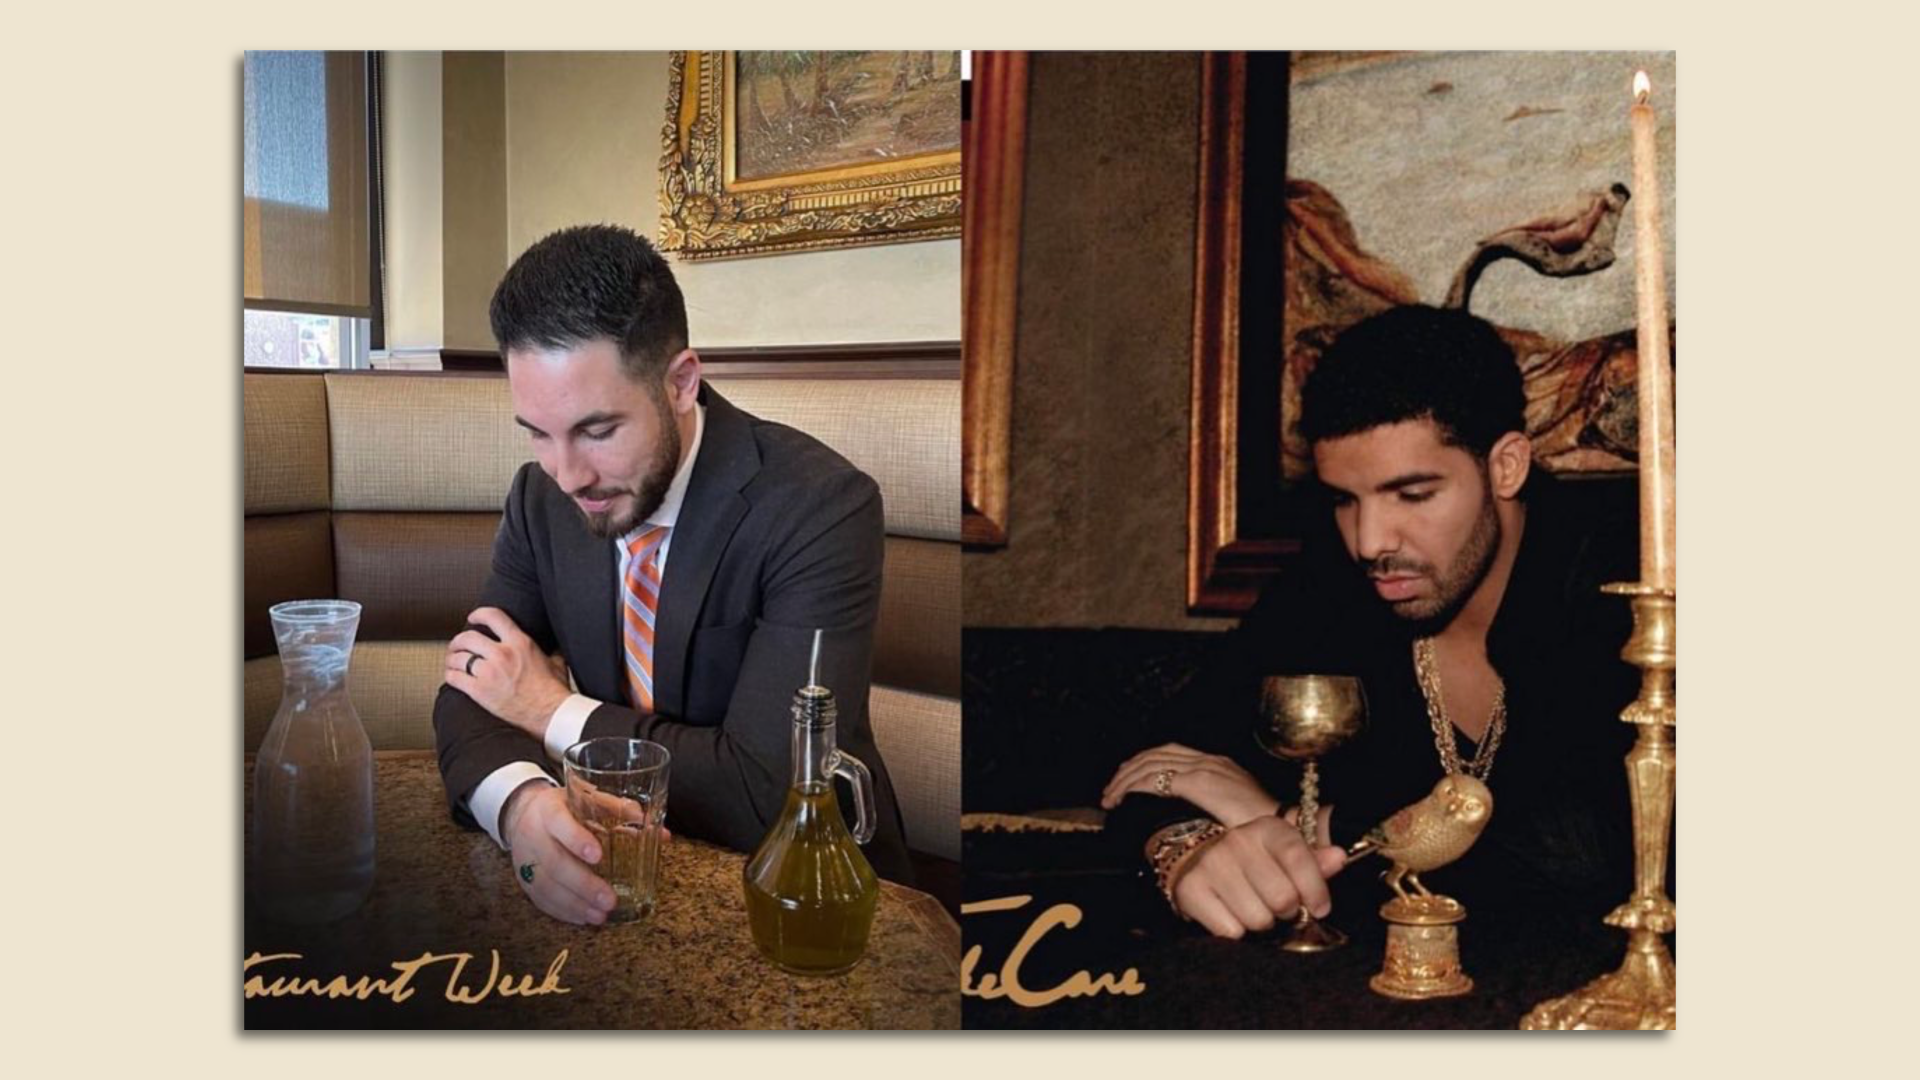  Dearborn Mayor Abdullah Hammoud's recreation of Drake's Take Care album cover inside Al Ameer to promote this year's Dearborn Restaurant Week was a hit on social media.